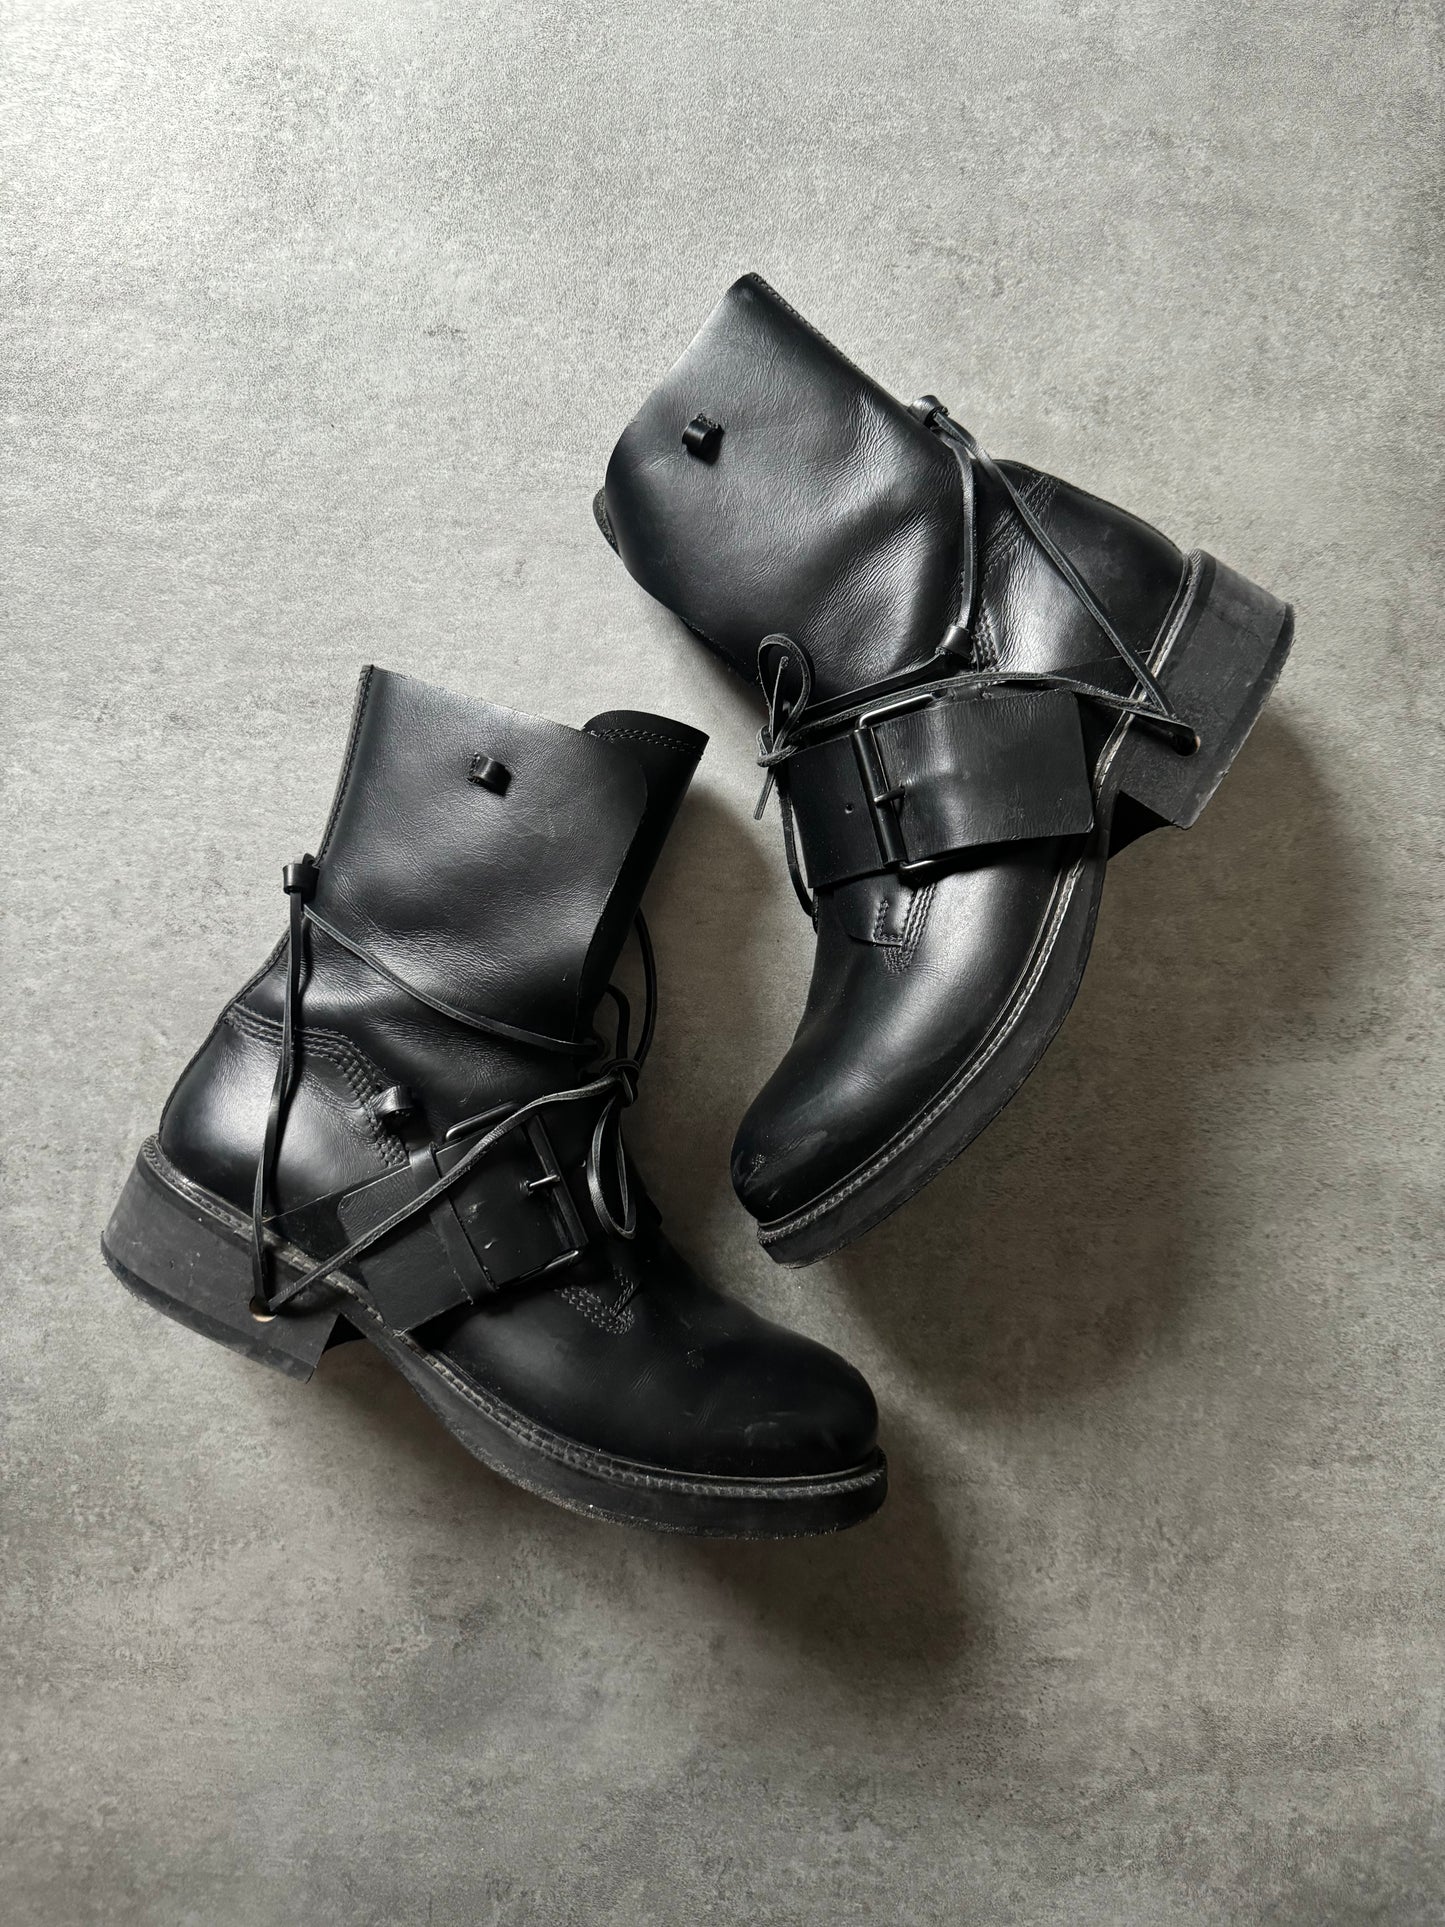 AW1998 Dirk Bikkembergs High Mountaineering Black Boots (43) - 10